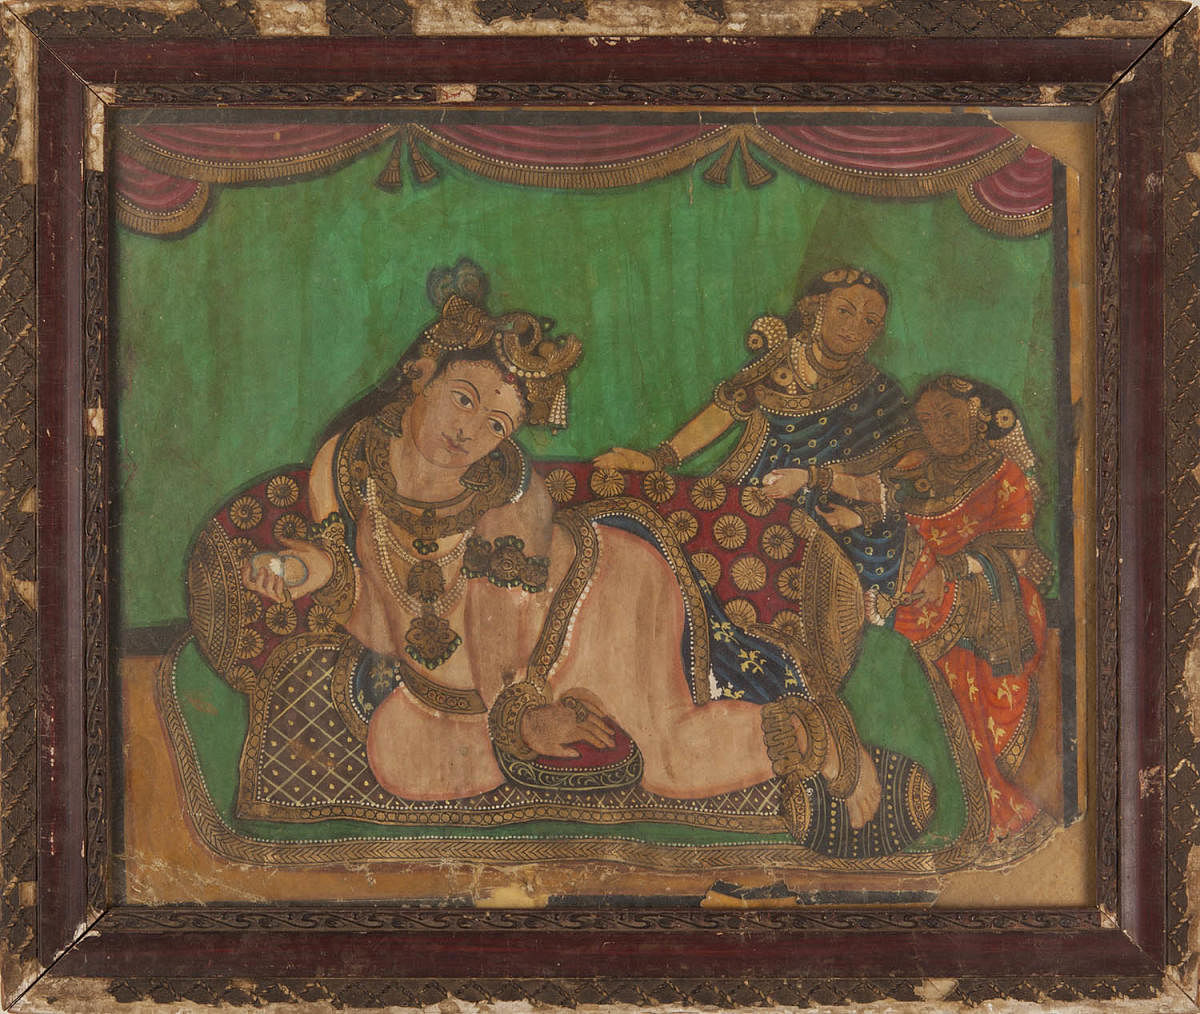 A Navaneetha Krishna painting from 1840 has stains, is flaking, and in need of conservation.